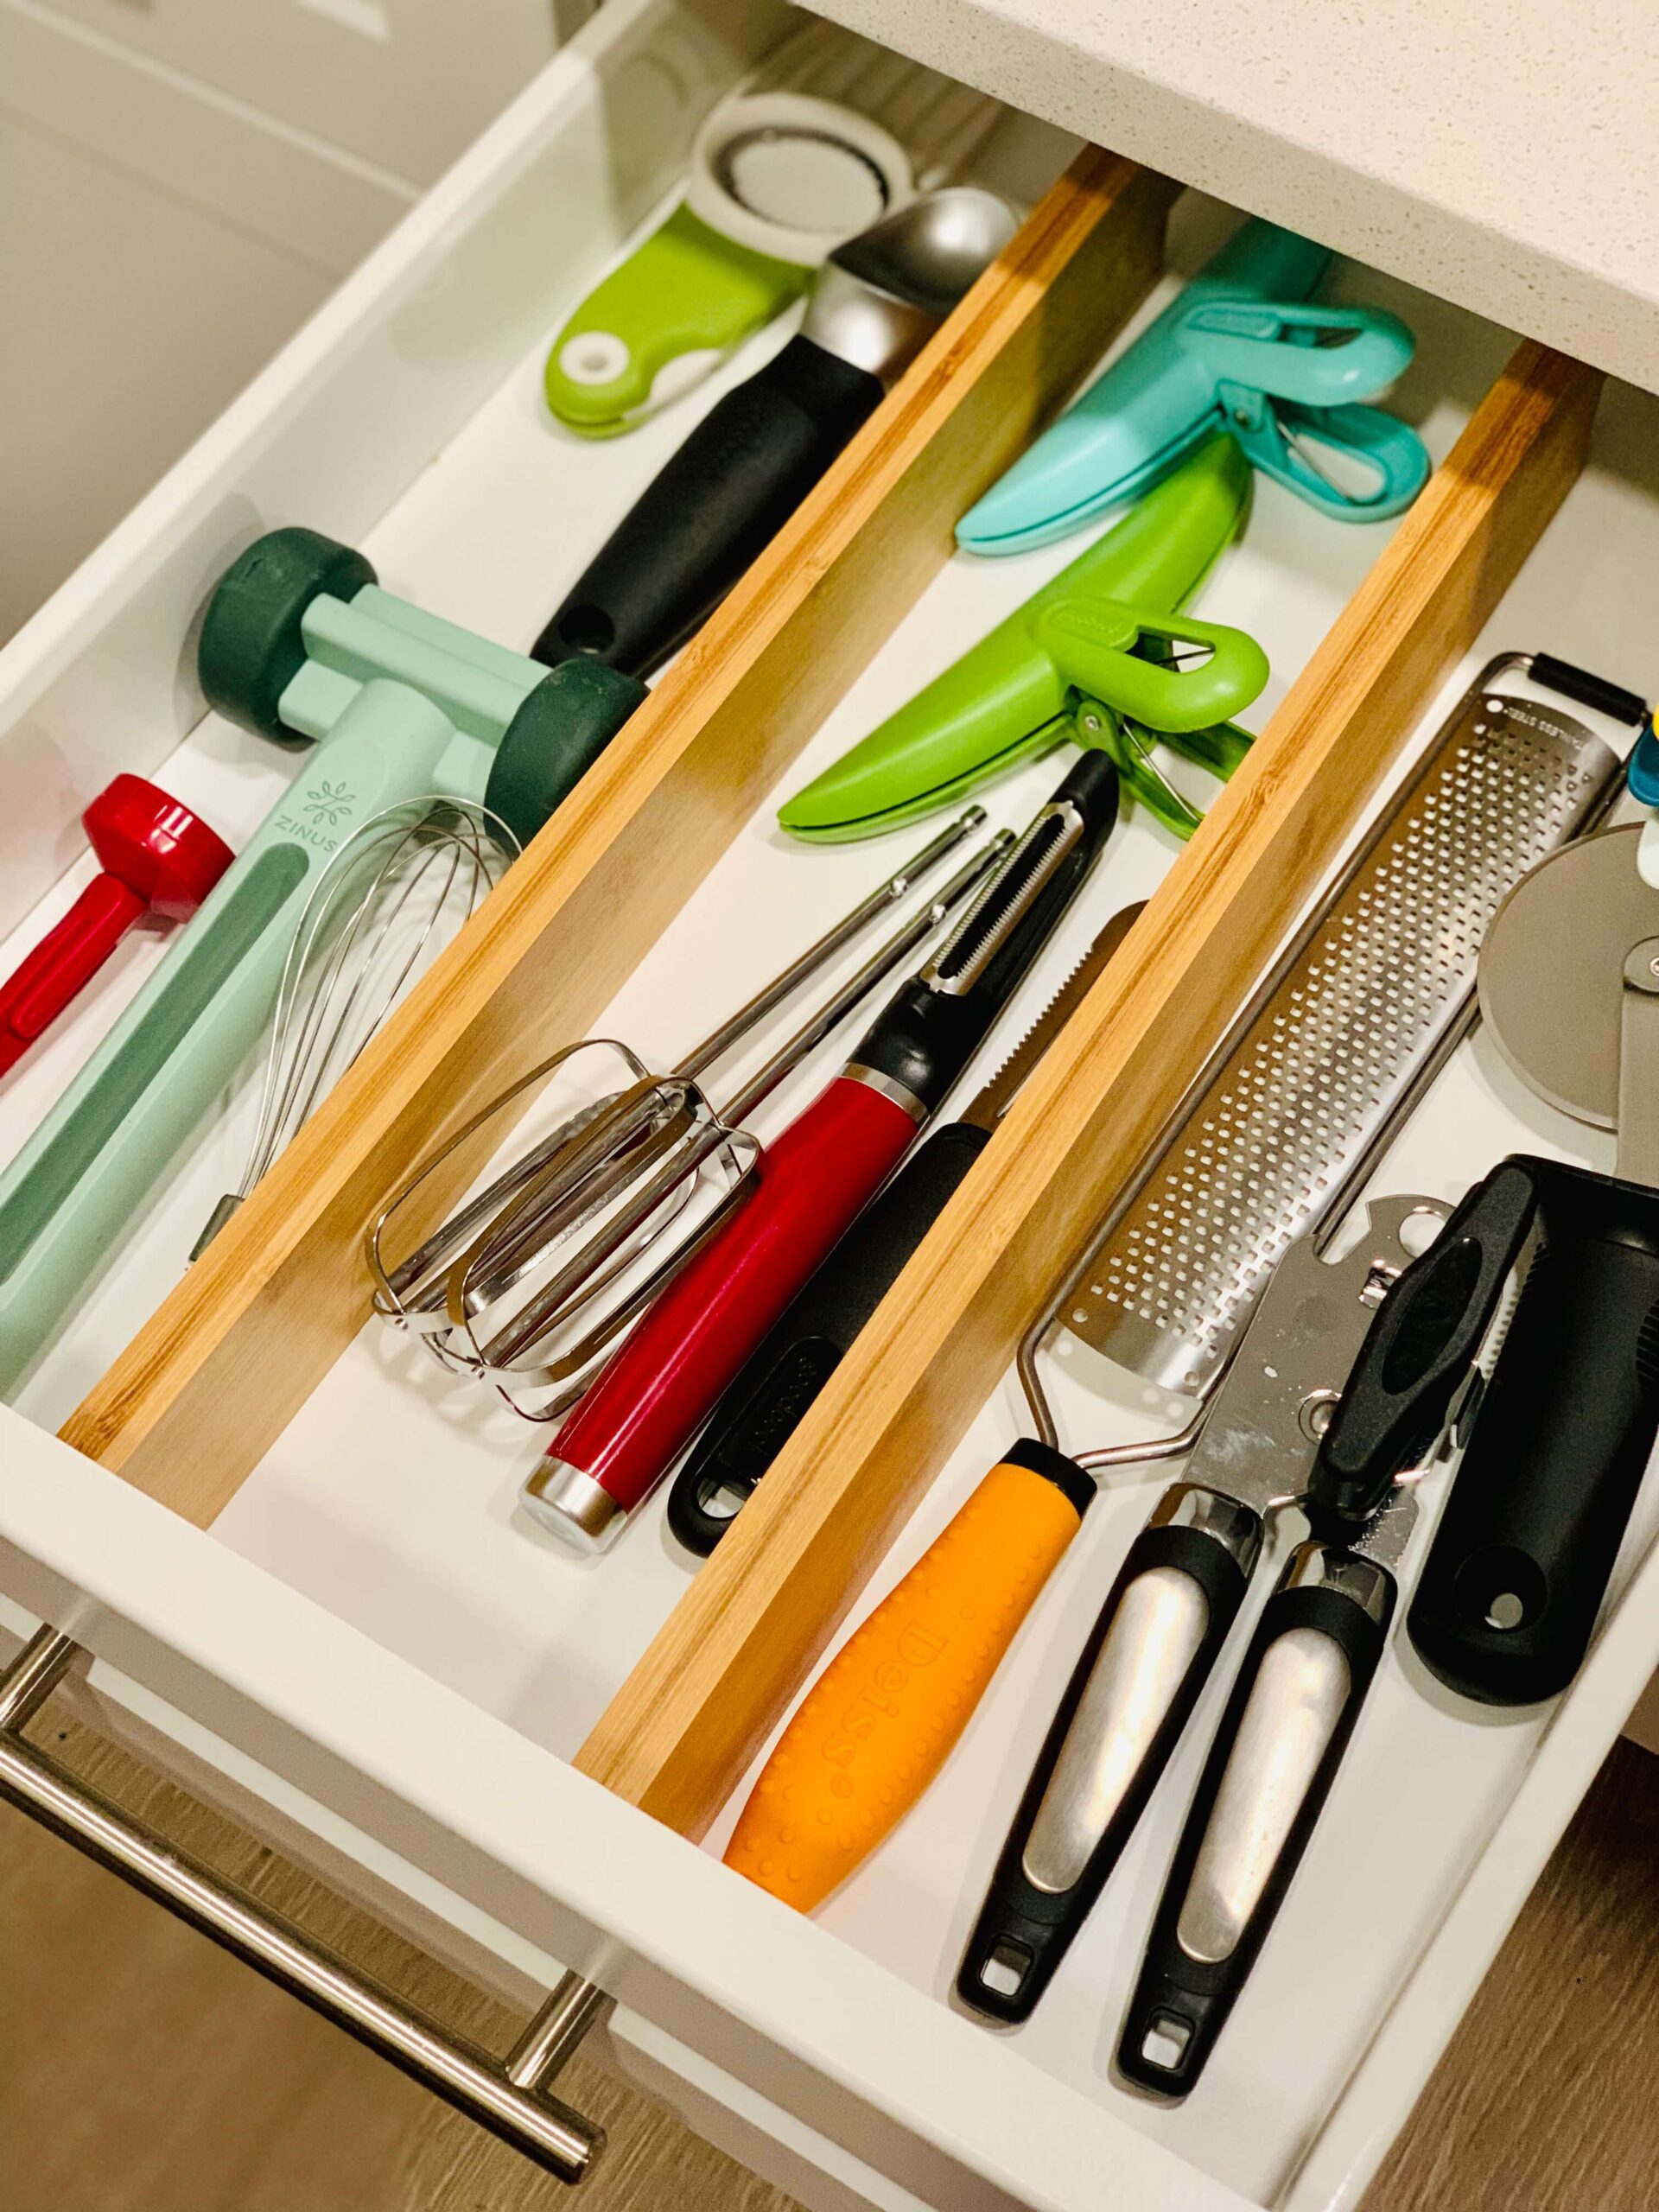 Kitchen Hacks to Organize and Make Your Kitchen Flow Better